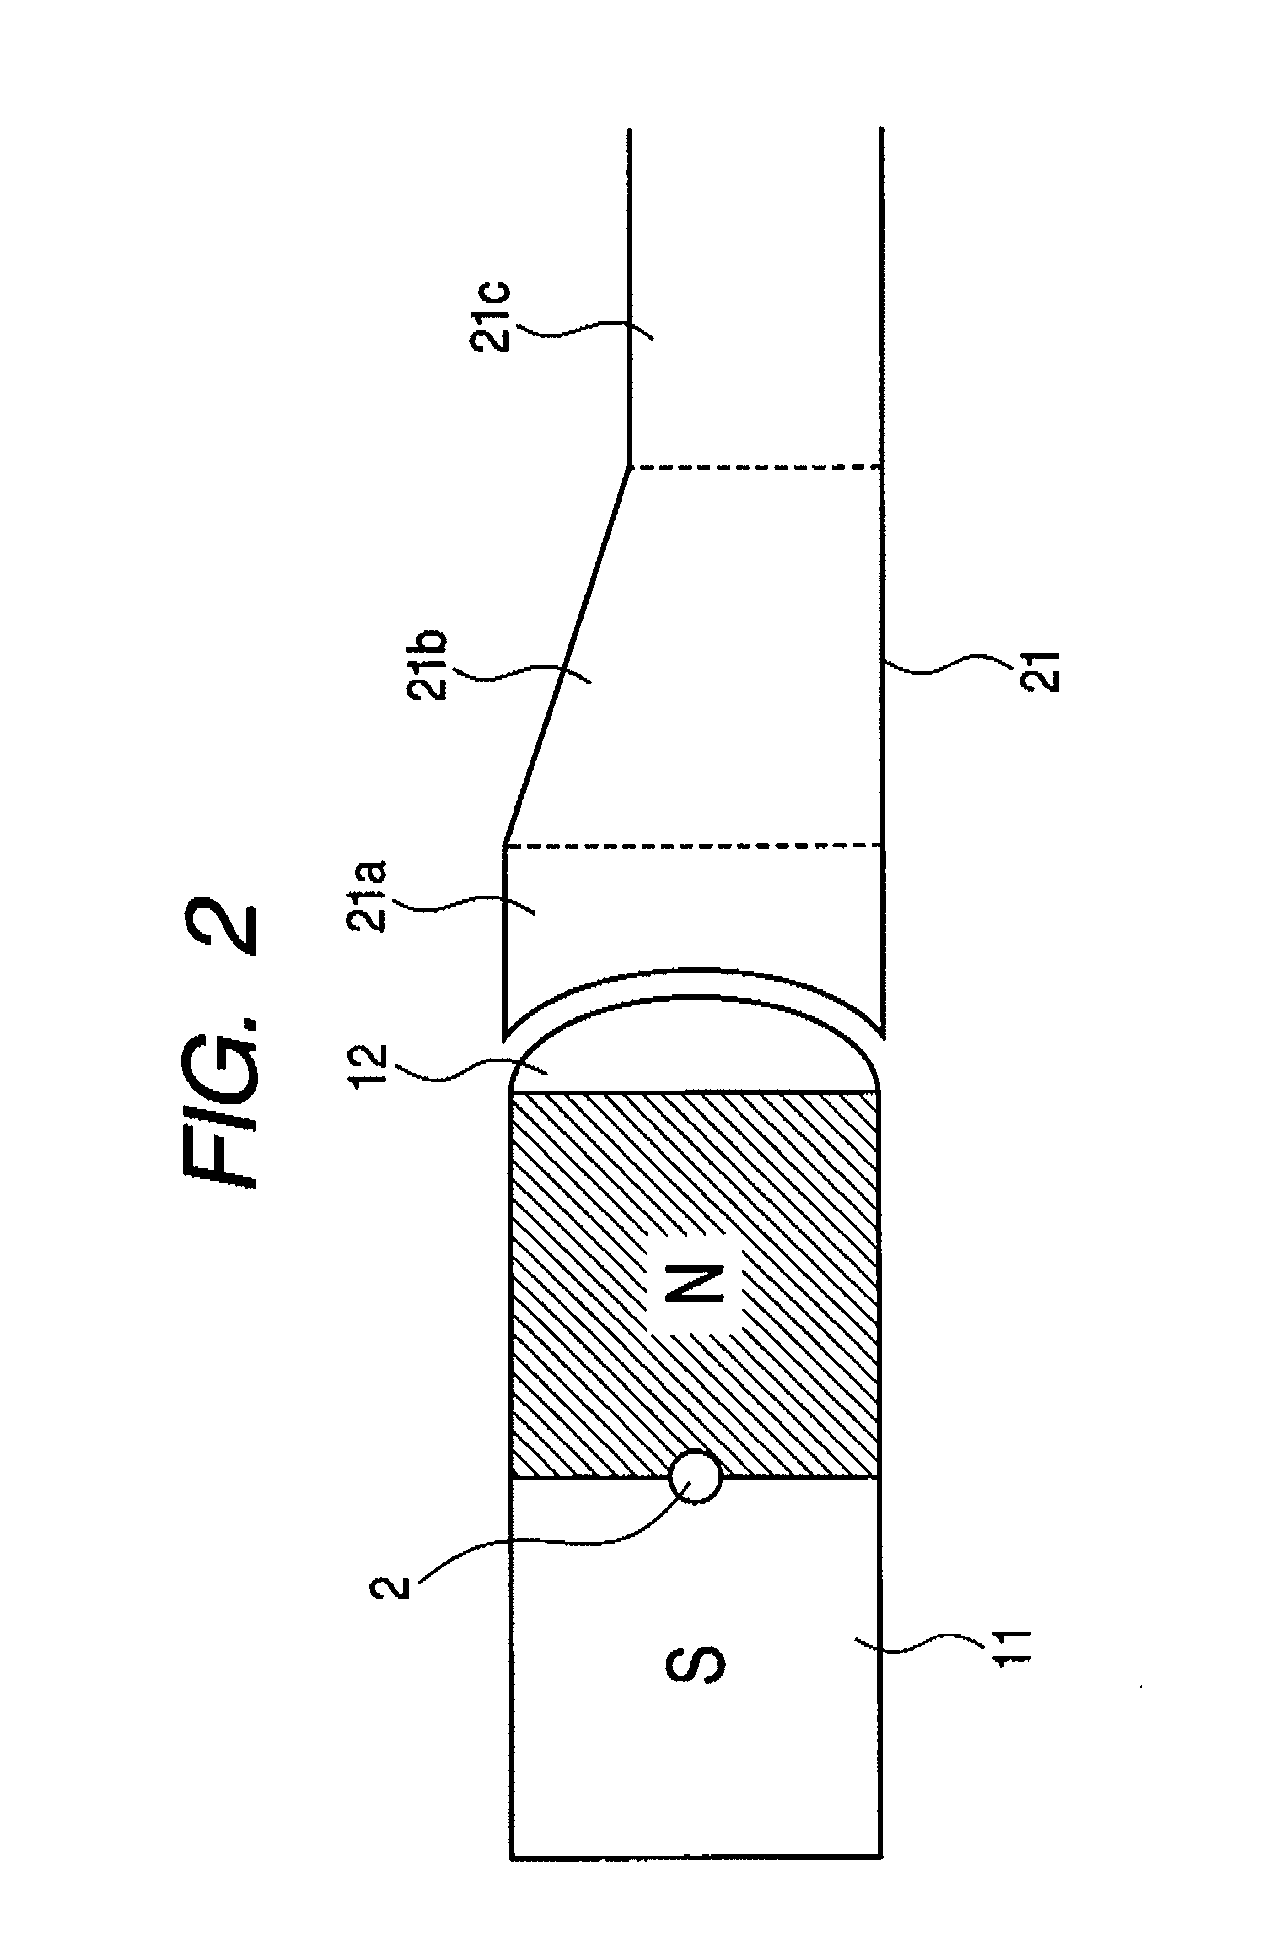 Magnet assembly capable of generating magnetic field having direction that is uniform and can be changed and sputtering apparatus using the same